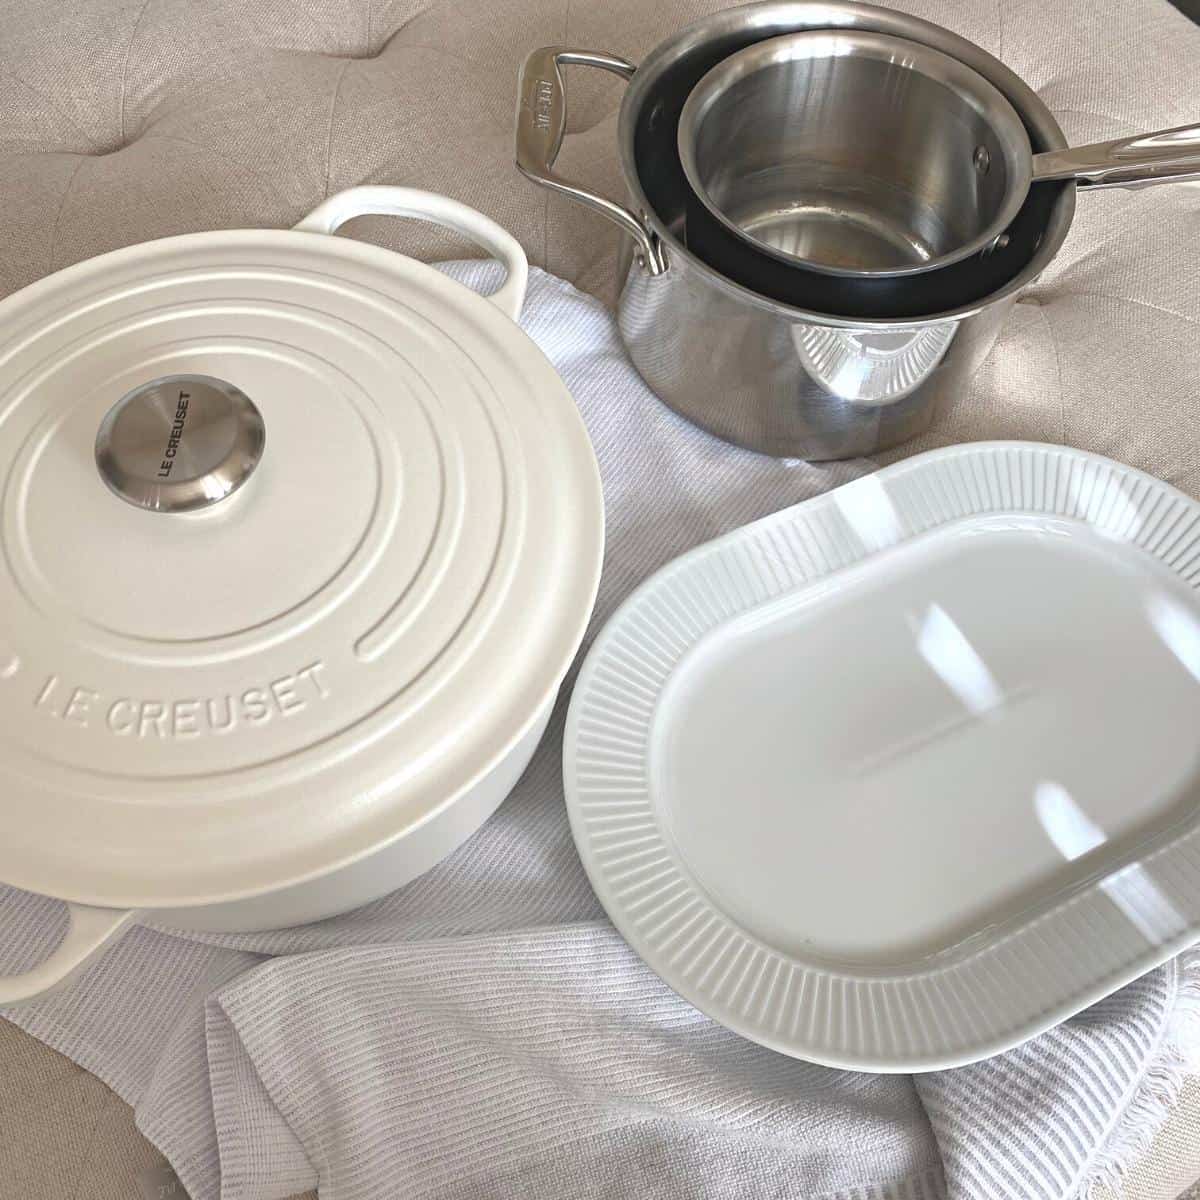 White cast iron pot, white serving platter and stainless steel pots on a neutral cotton towel